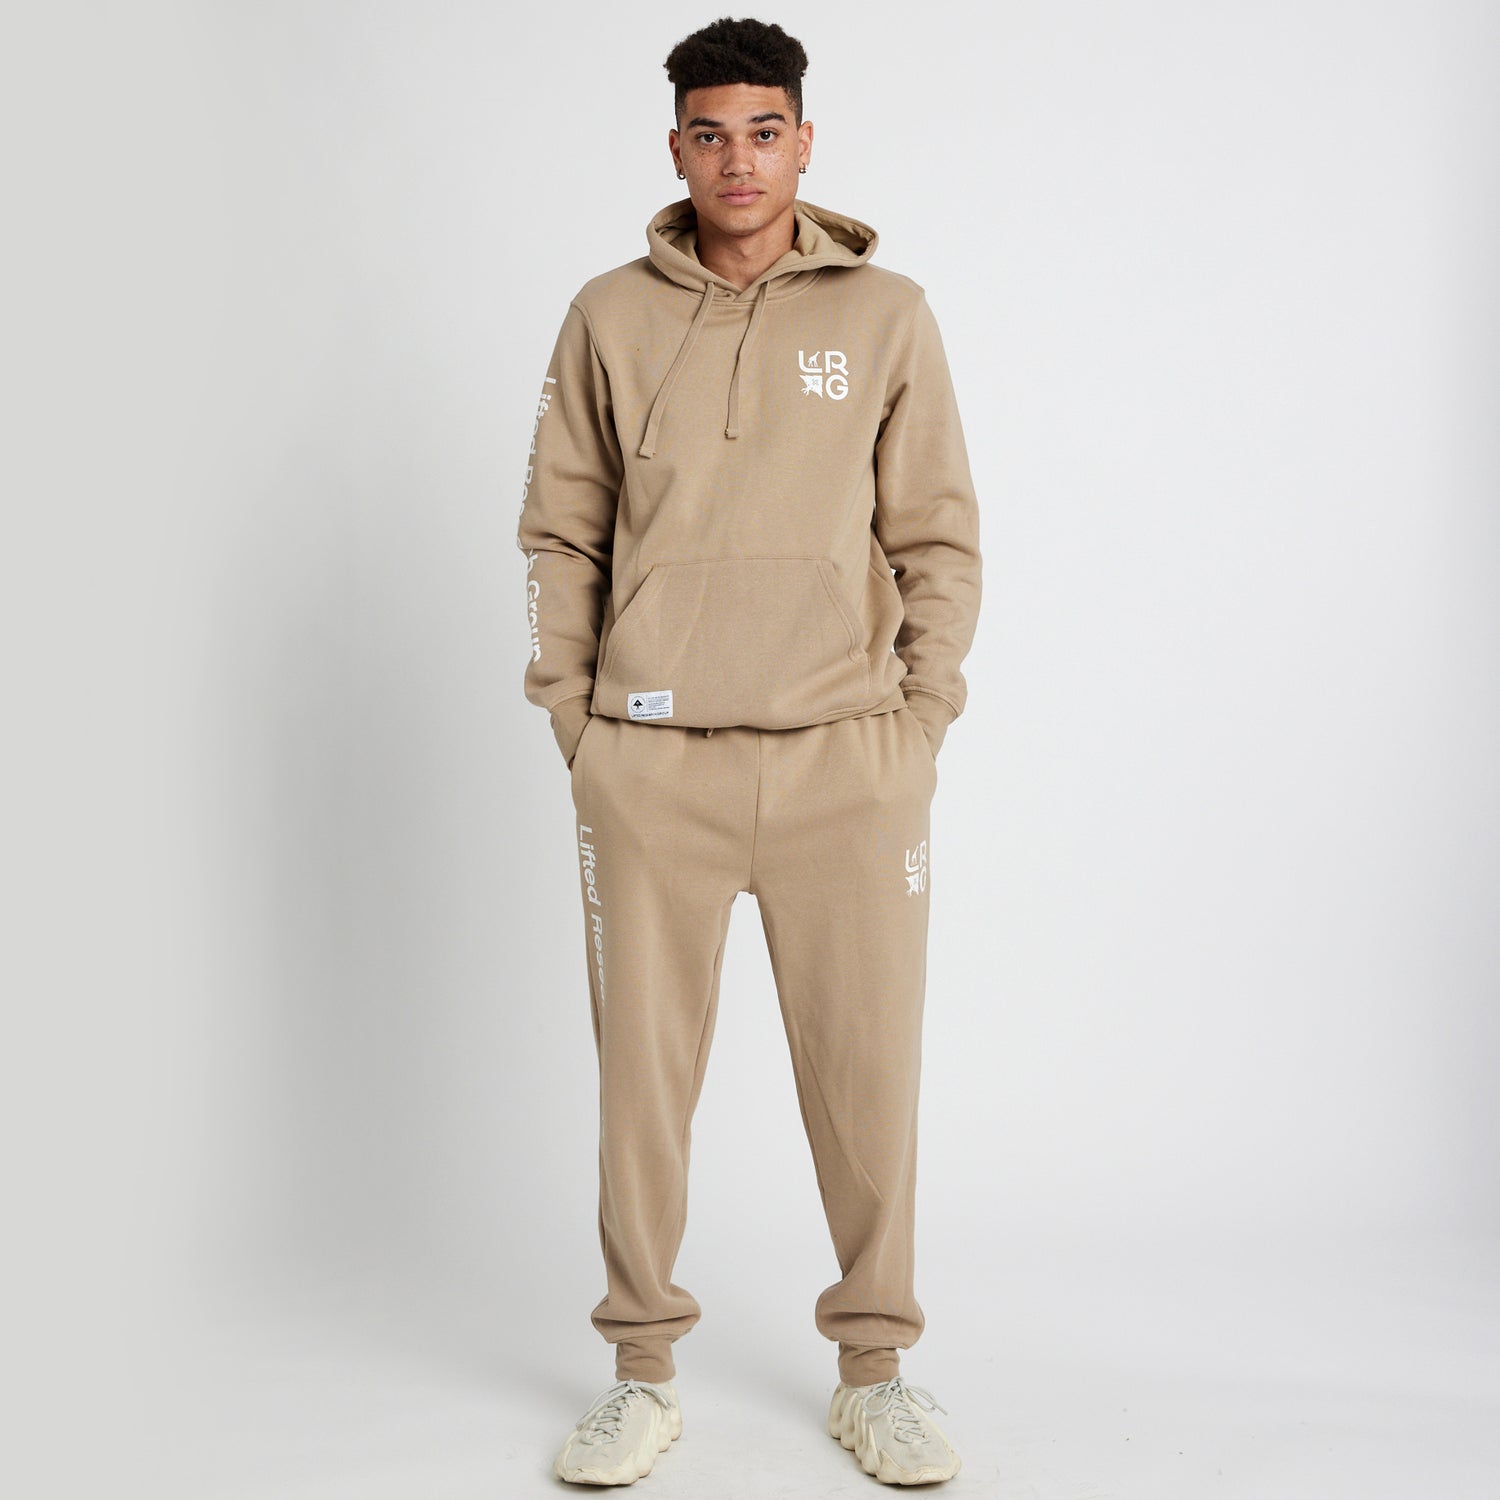 STACKED MULTI LOGO PULLOVER HOODIE - NATURAL